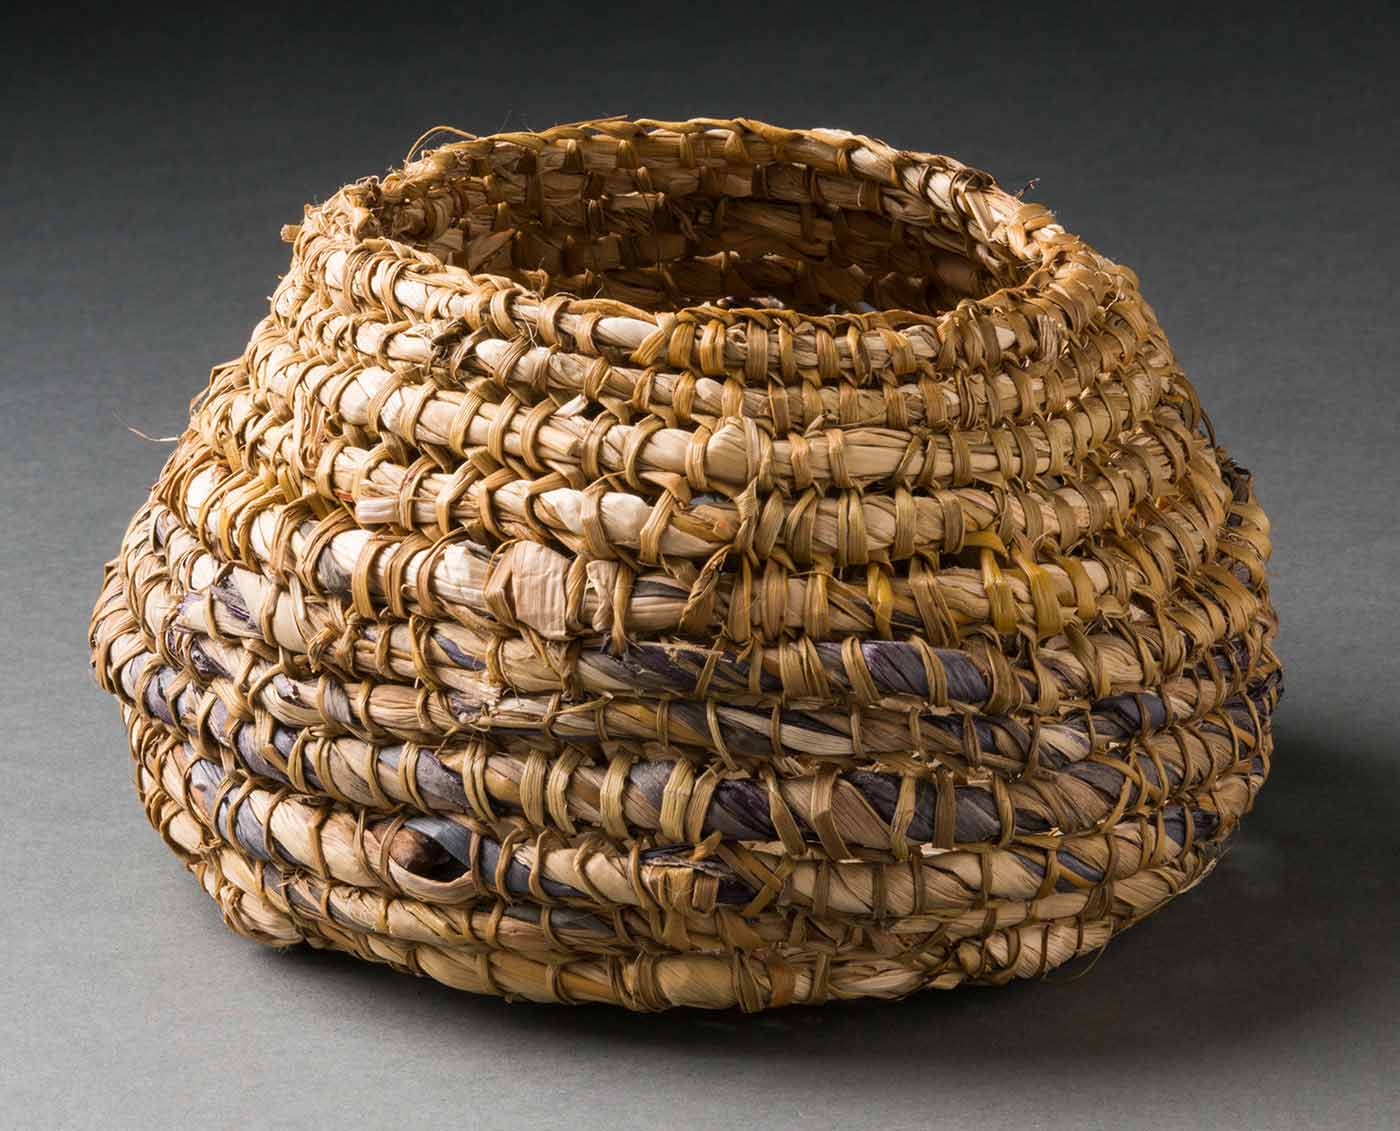 A circular coiled basket with a flat base and convex sides that taper towards the top to a smaller circular opening.